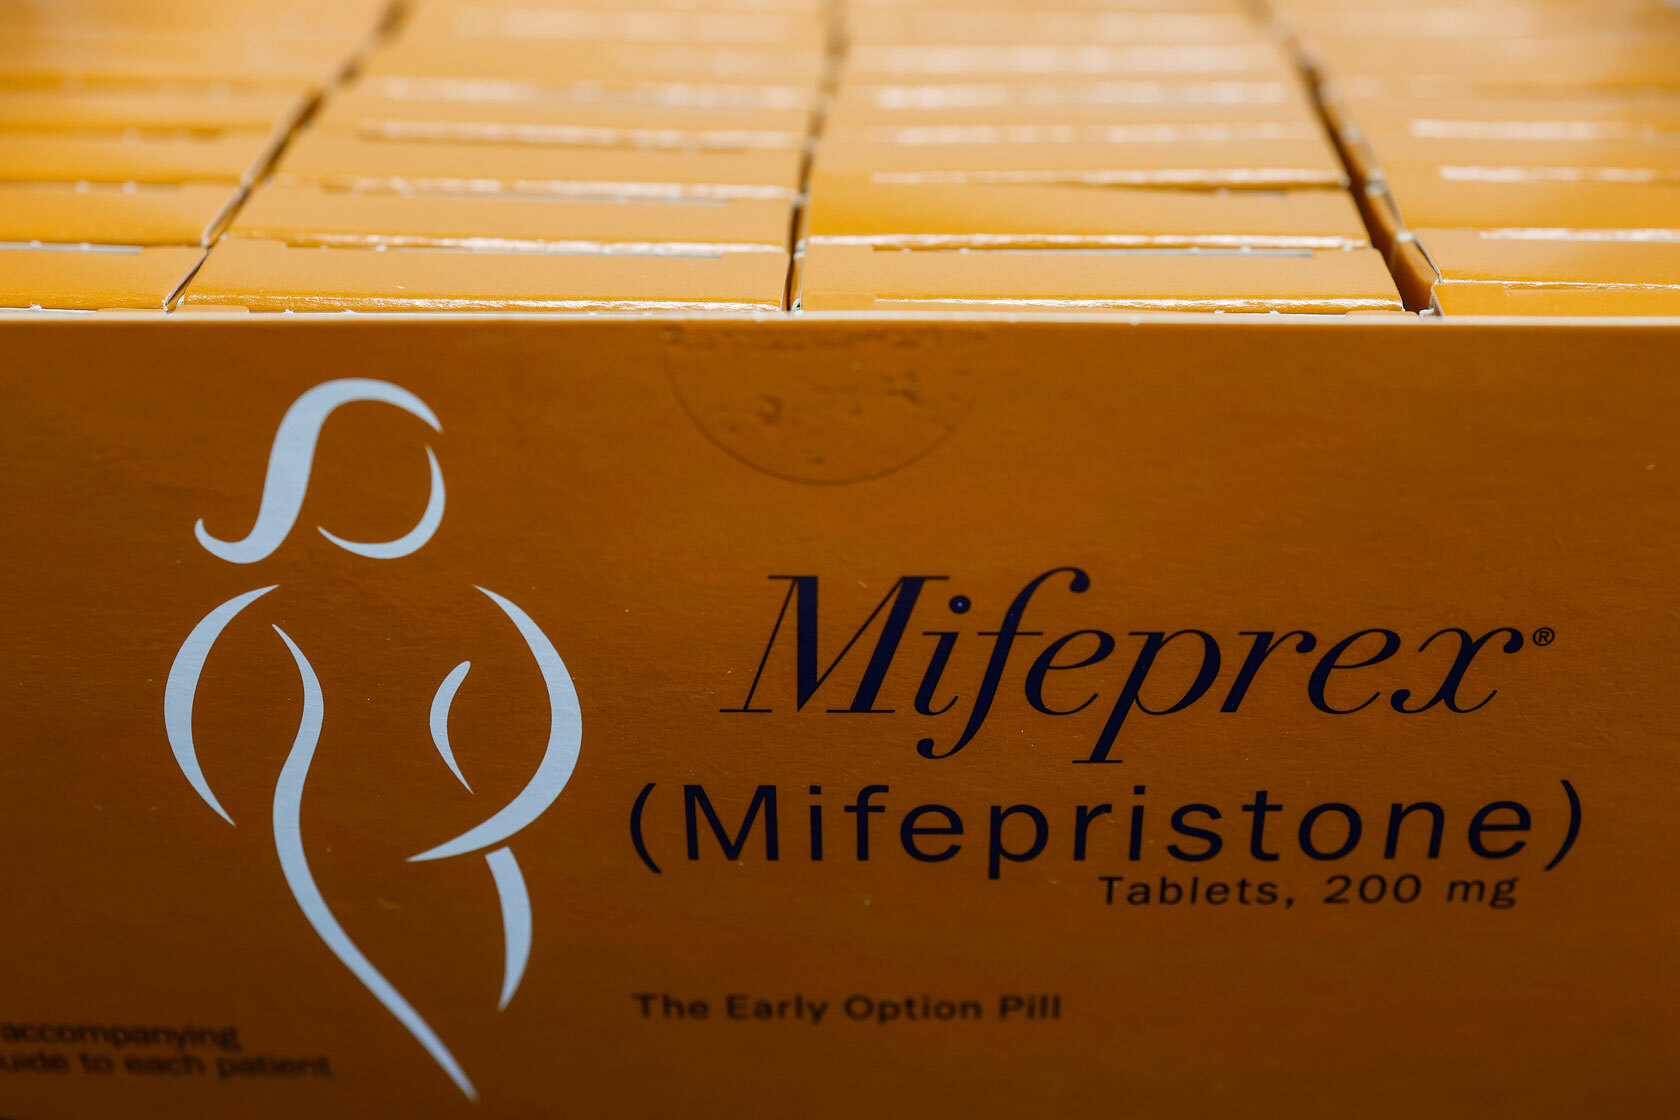 Packages of Mifepristone tablets are displayed at a family planning clinic.